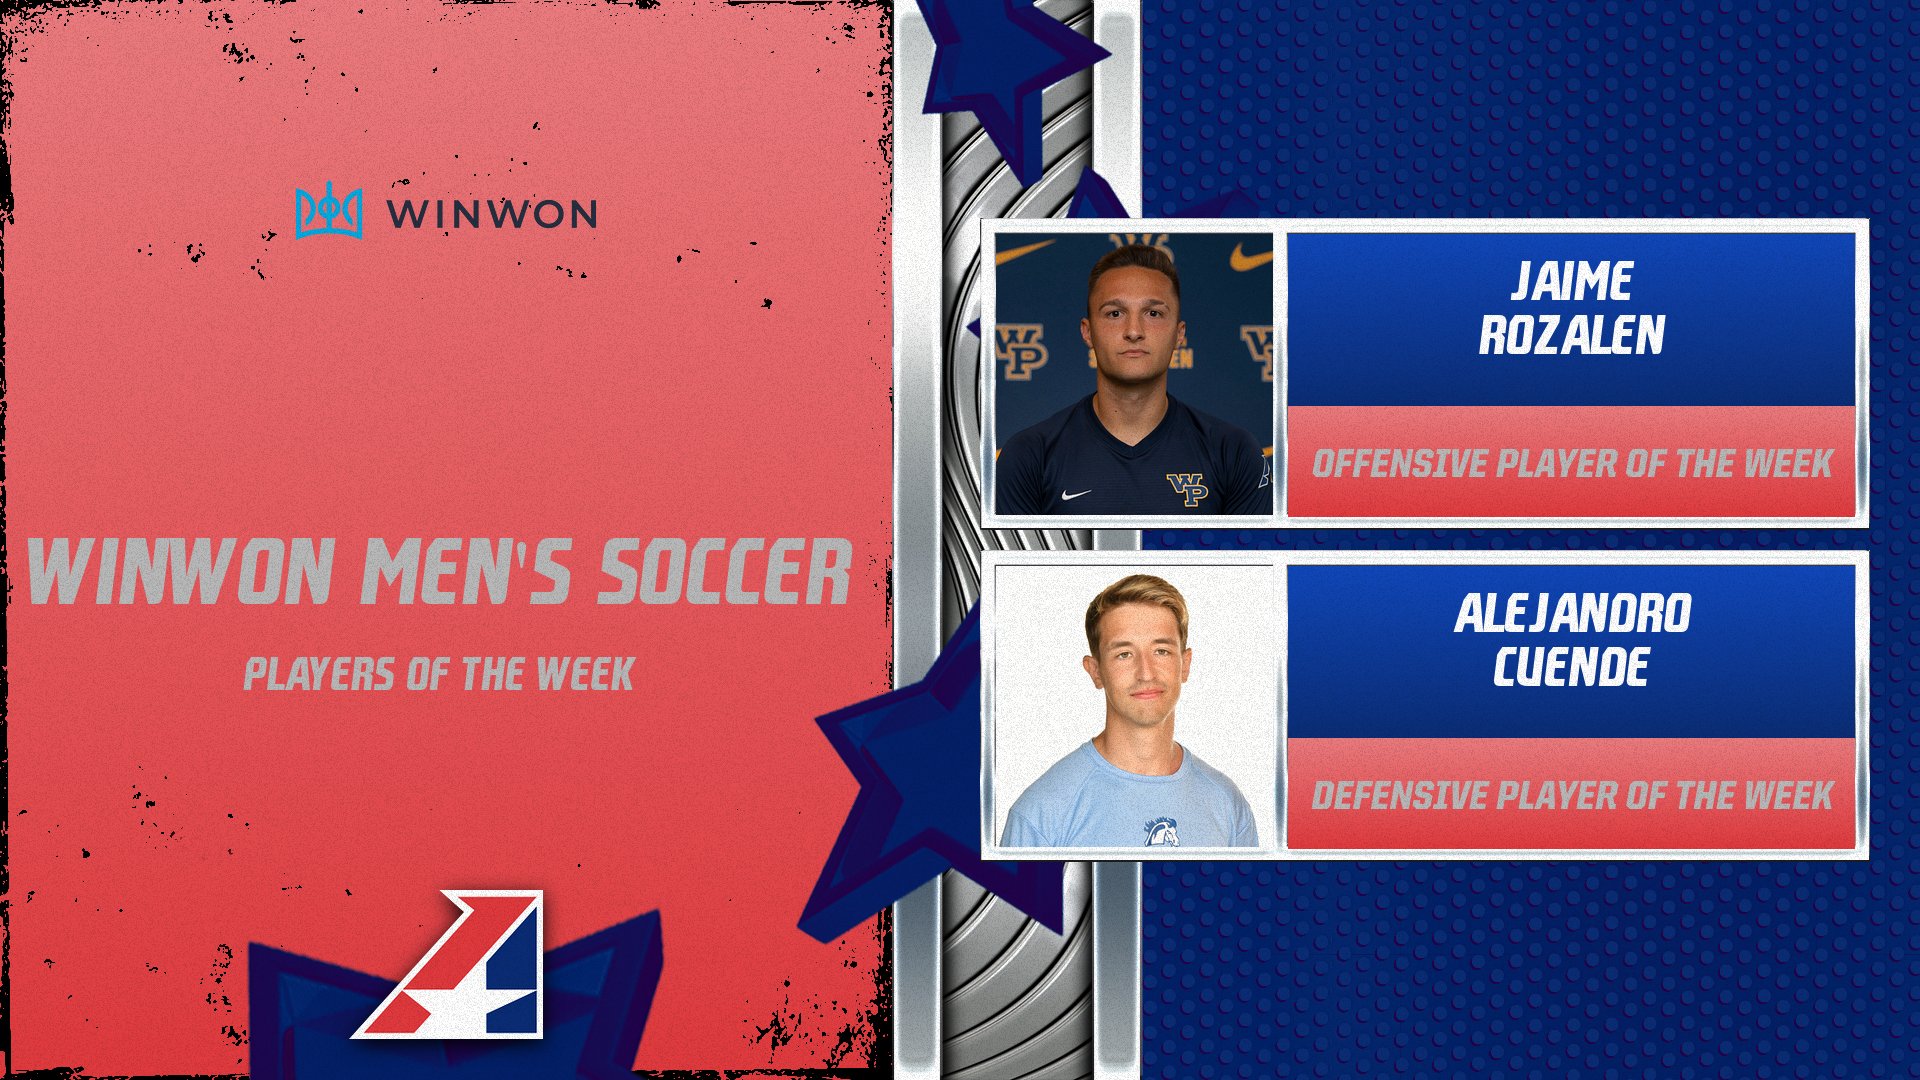 Rozalen, Cuende Selected WinWon Men’s Soccer Players of the Week